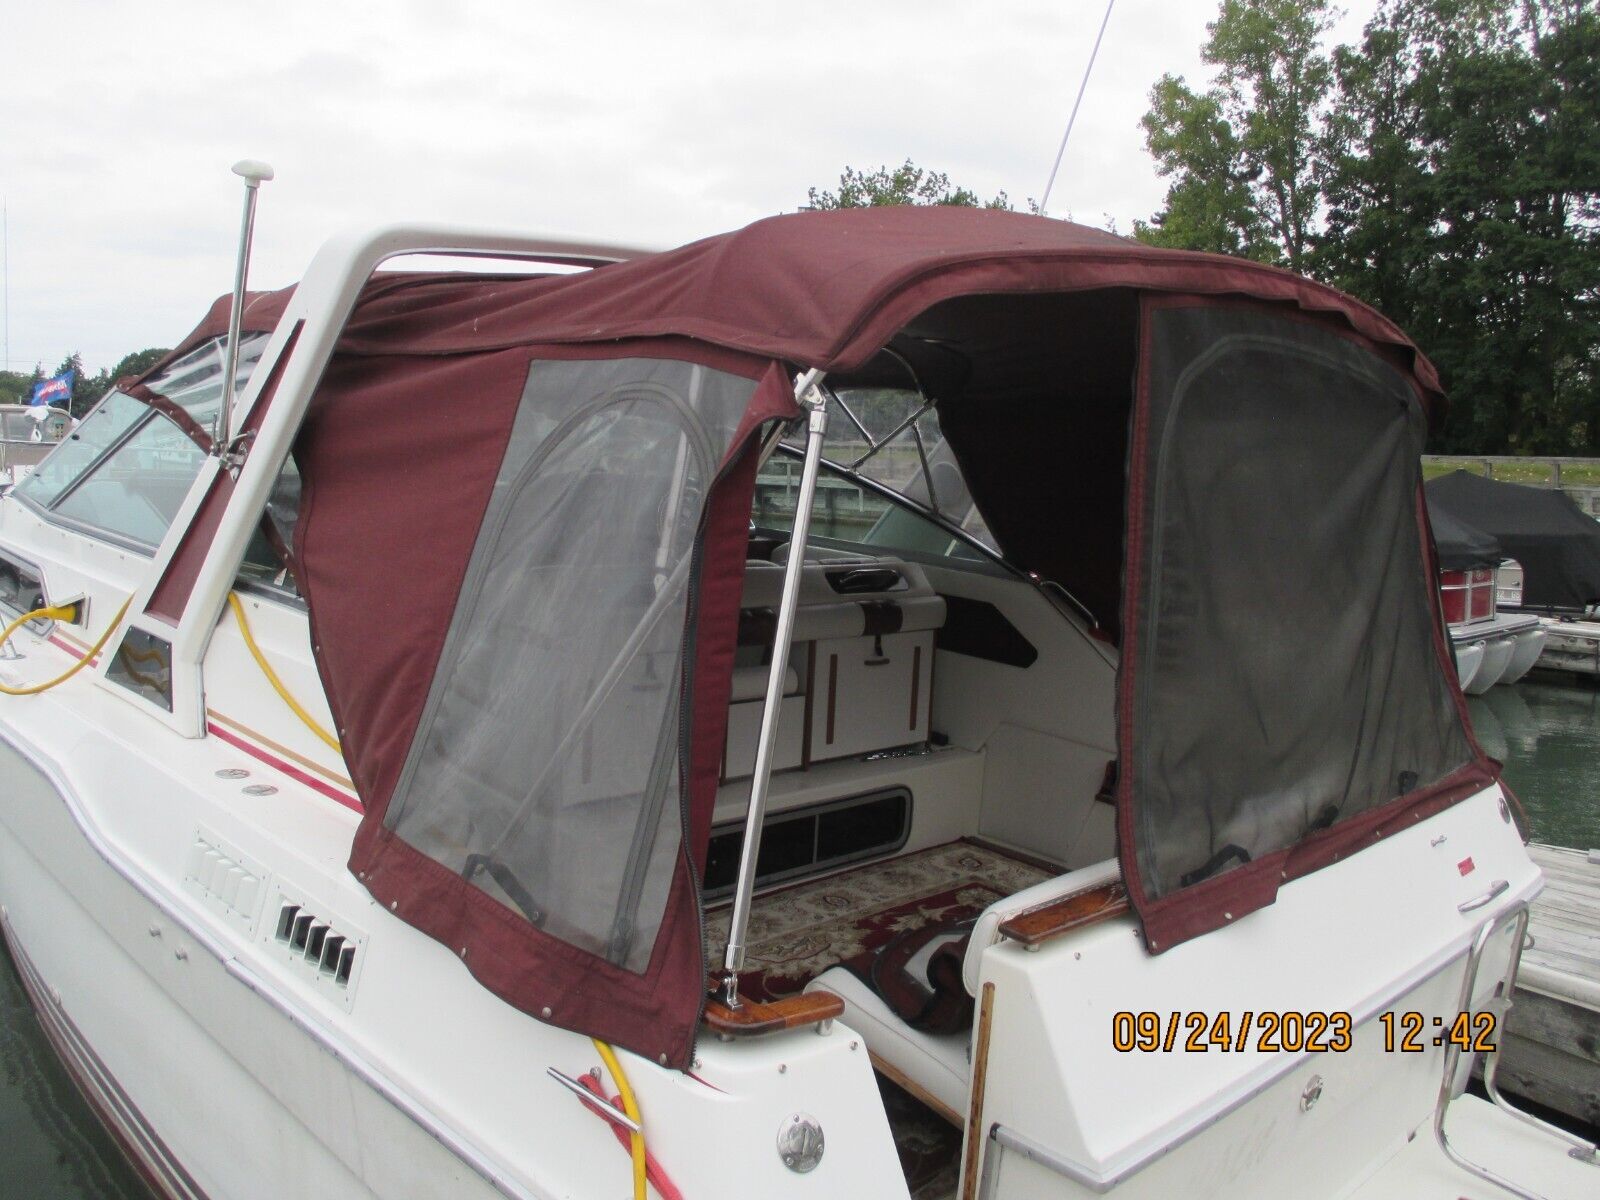 30' SEA RAY SUNDANCER 1989 for sale for $1,207 - Boats-from-USA.com